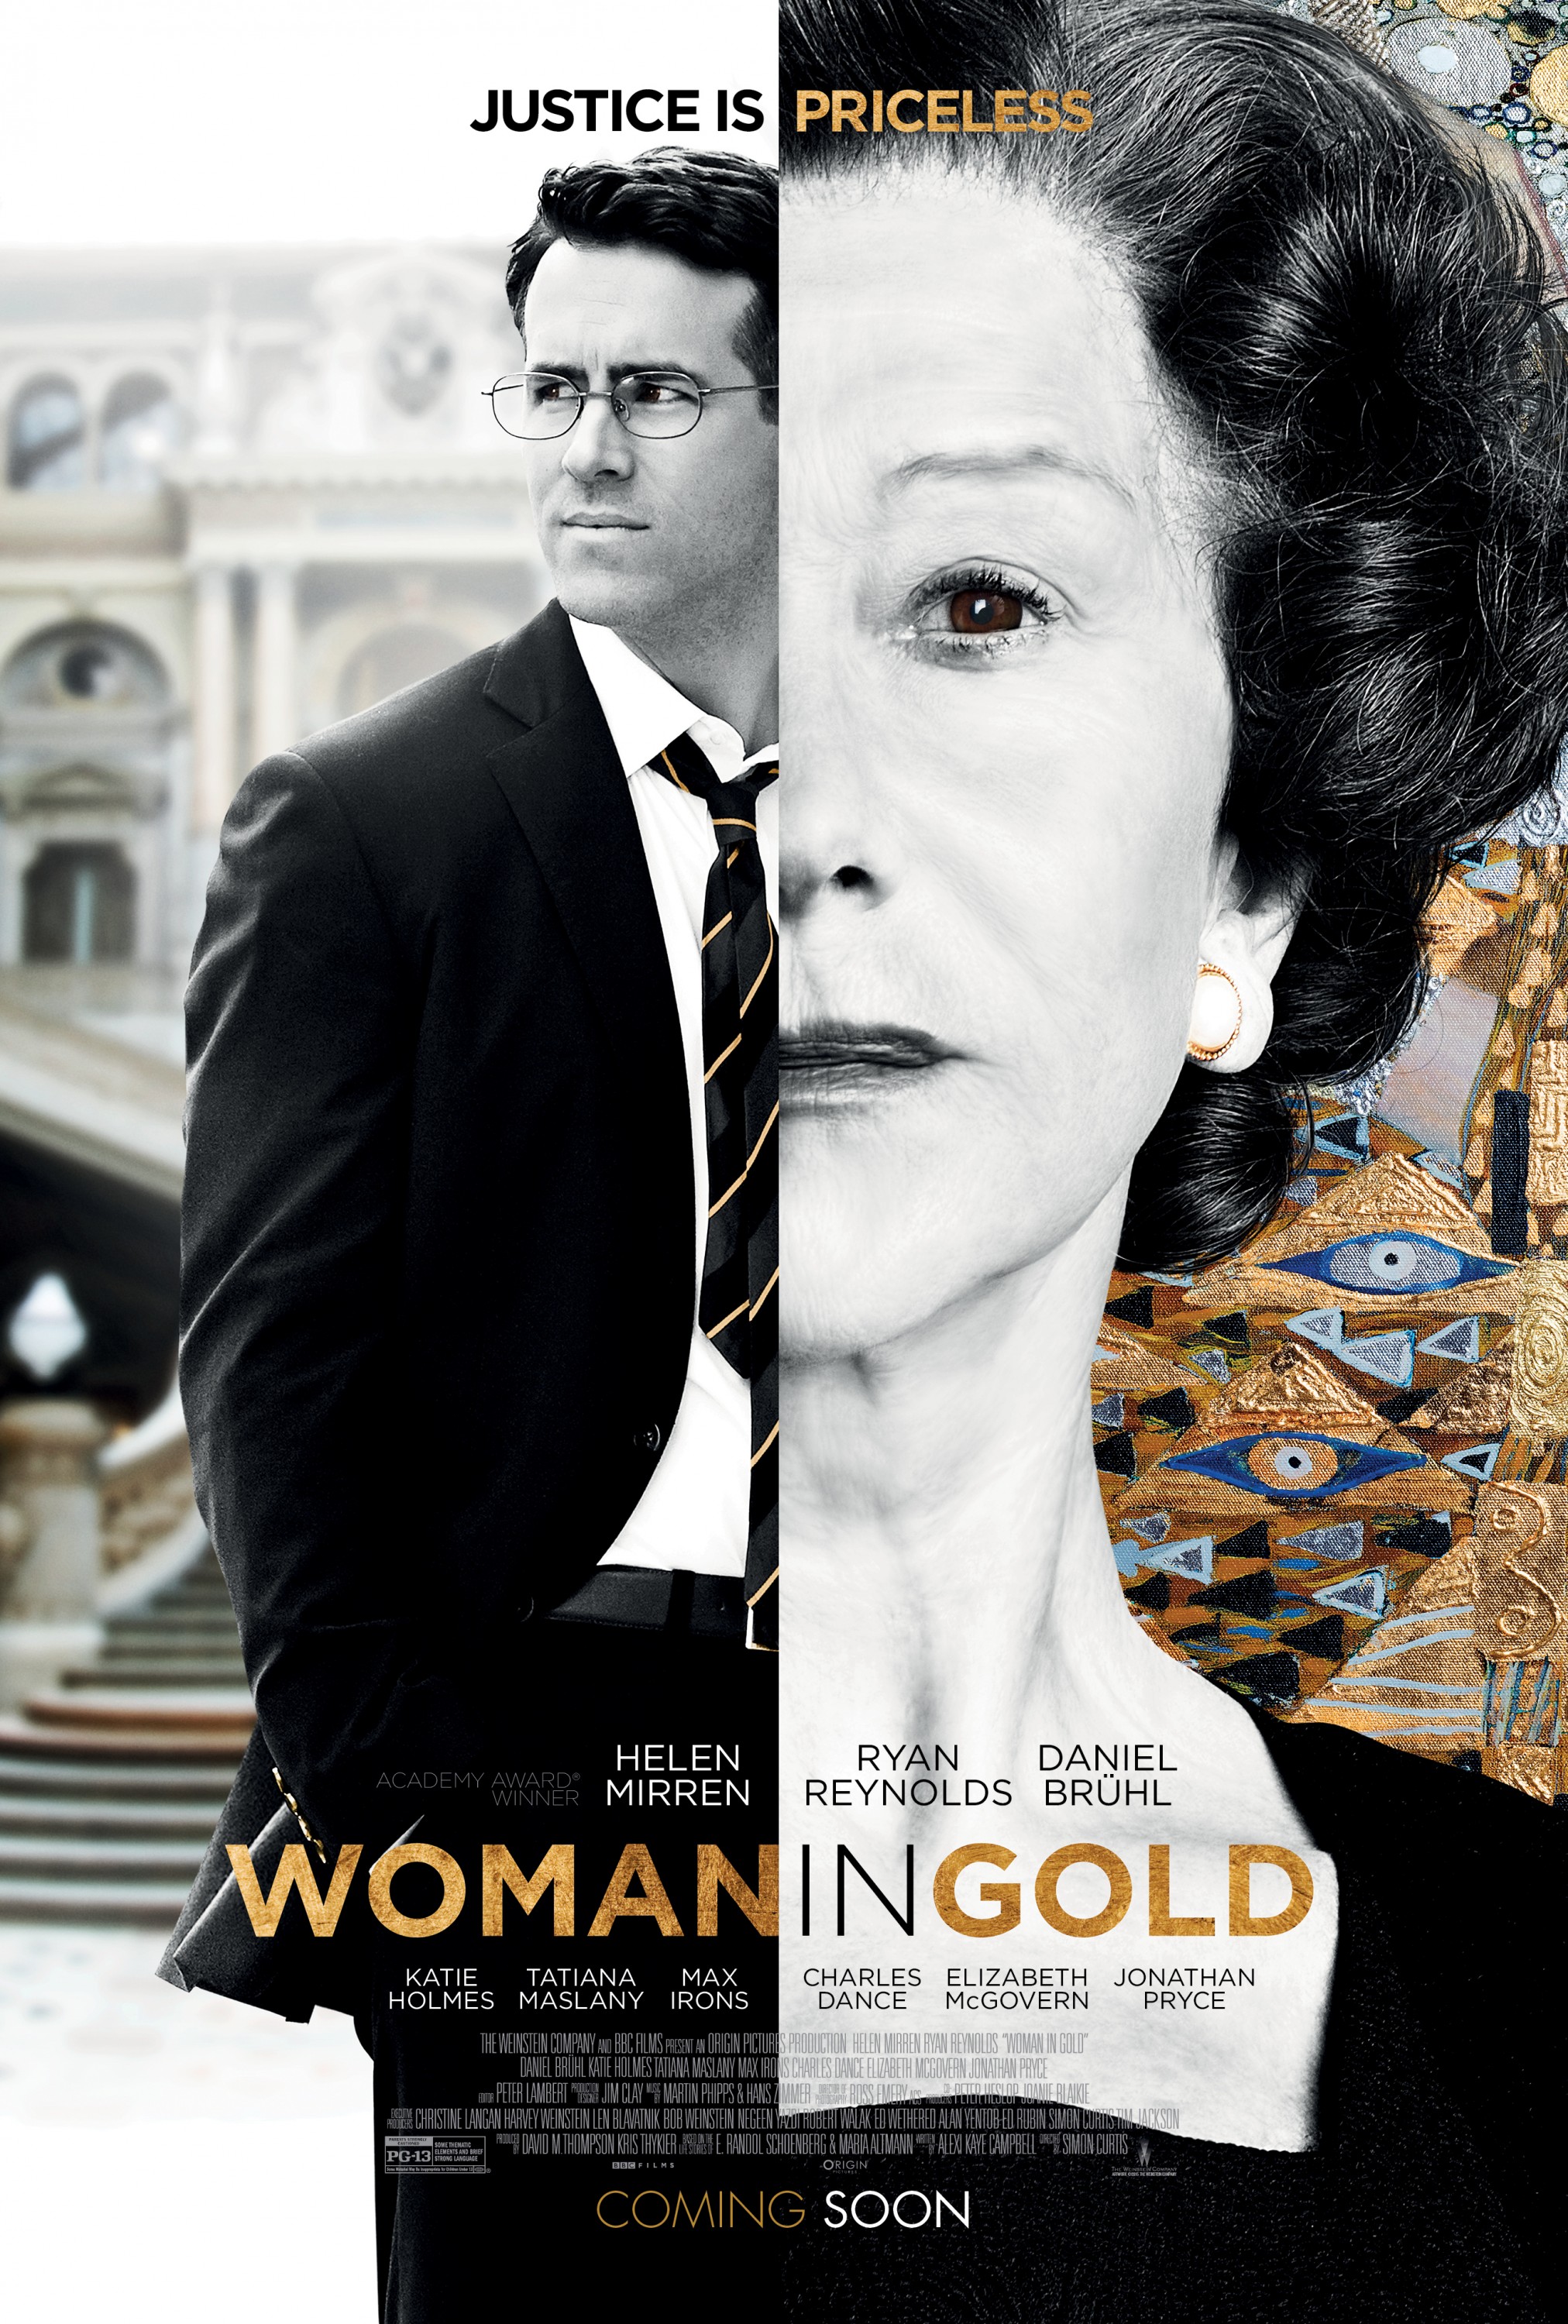  / 2015 Movie Poster Gallery / Woman in Gold 2 of 7 / XXLG Image